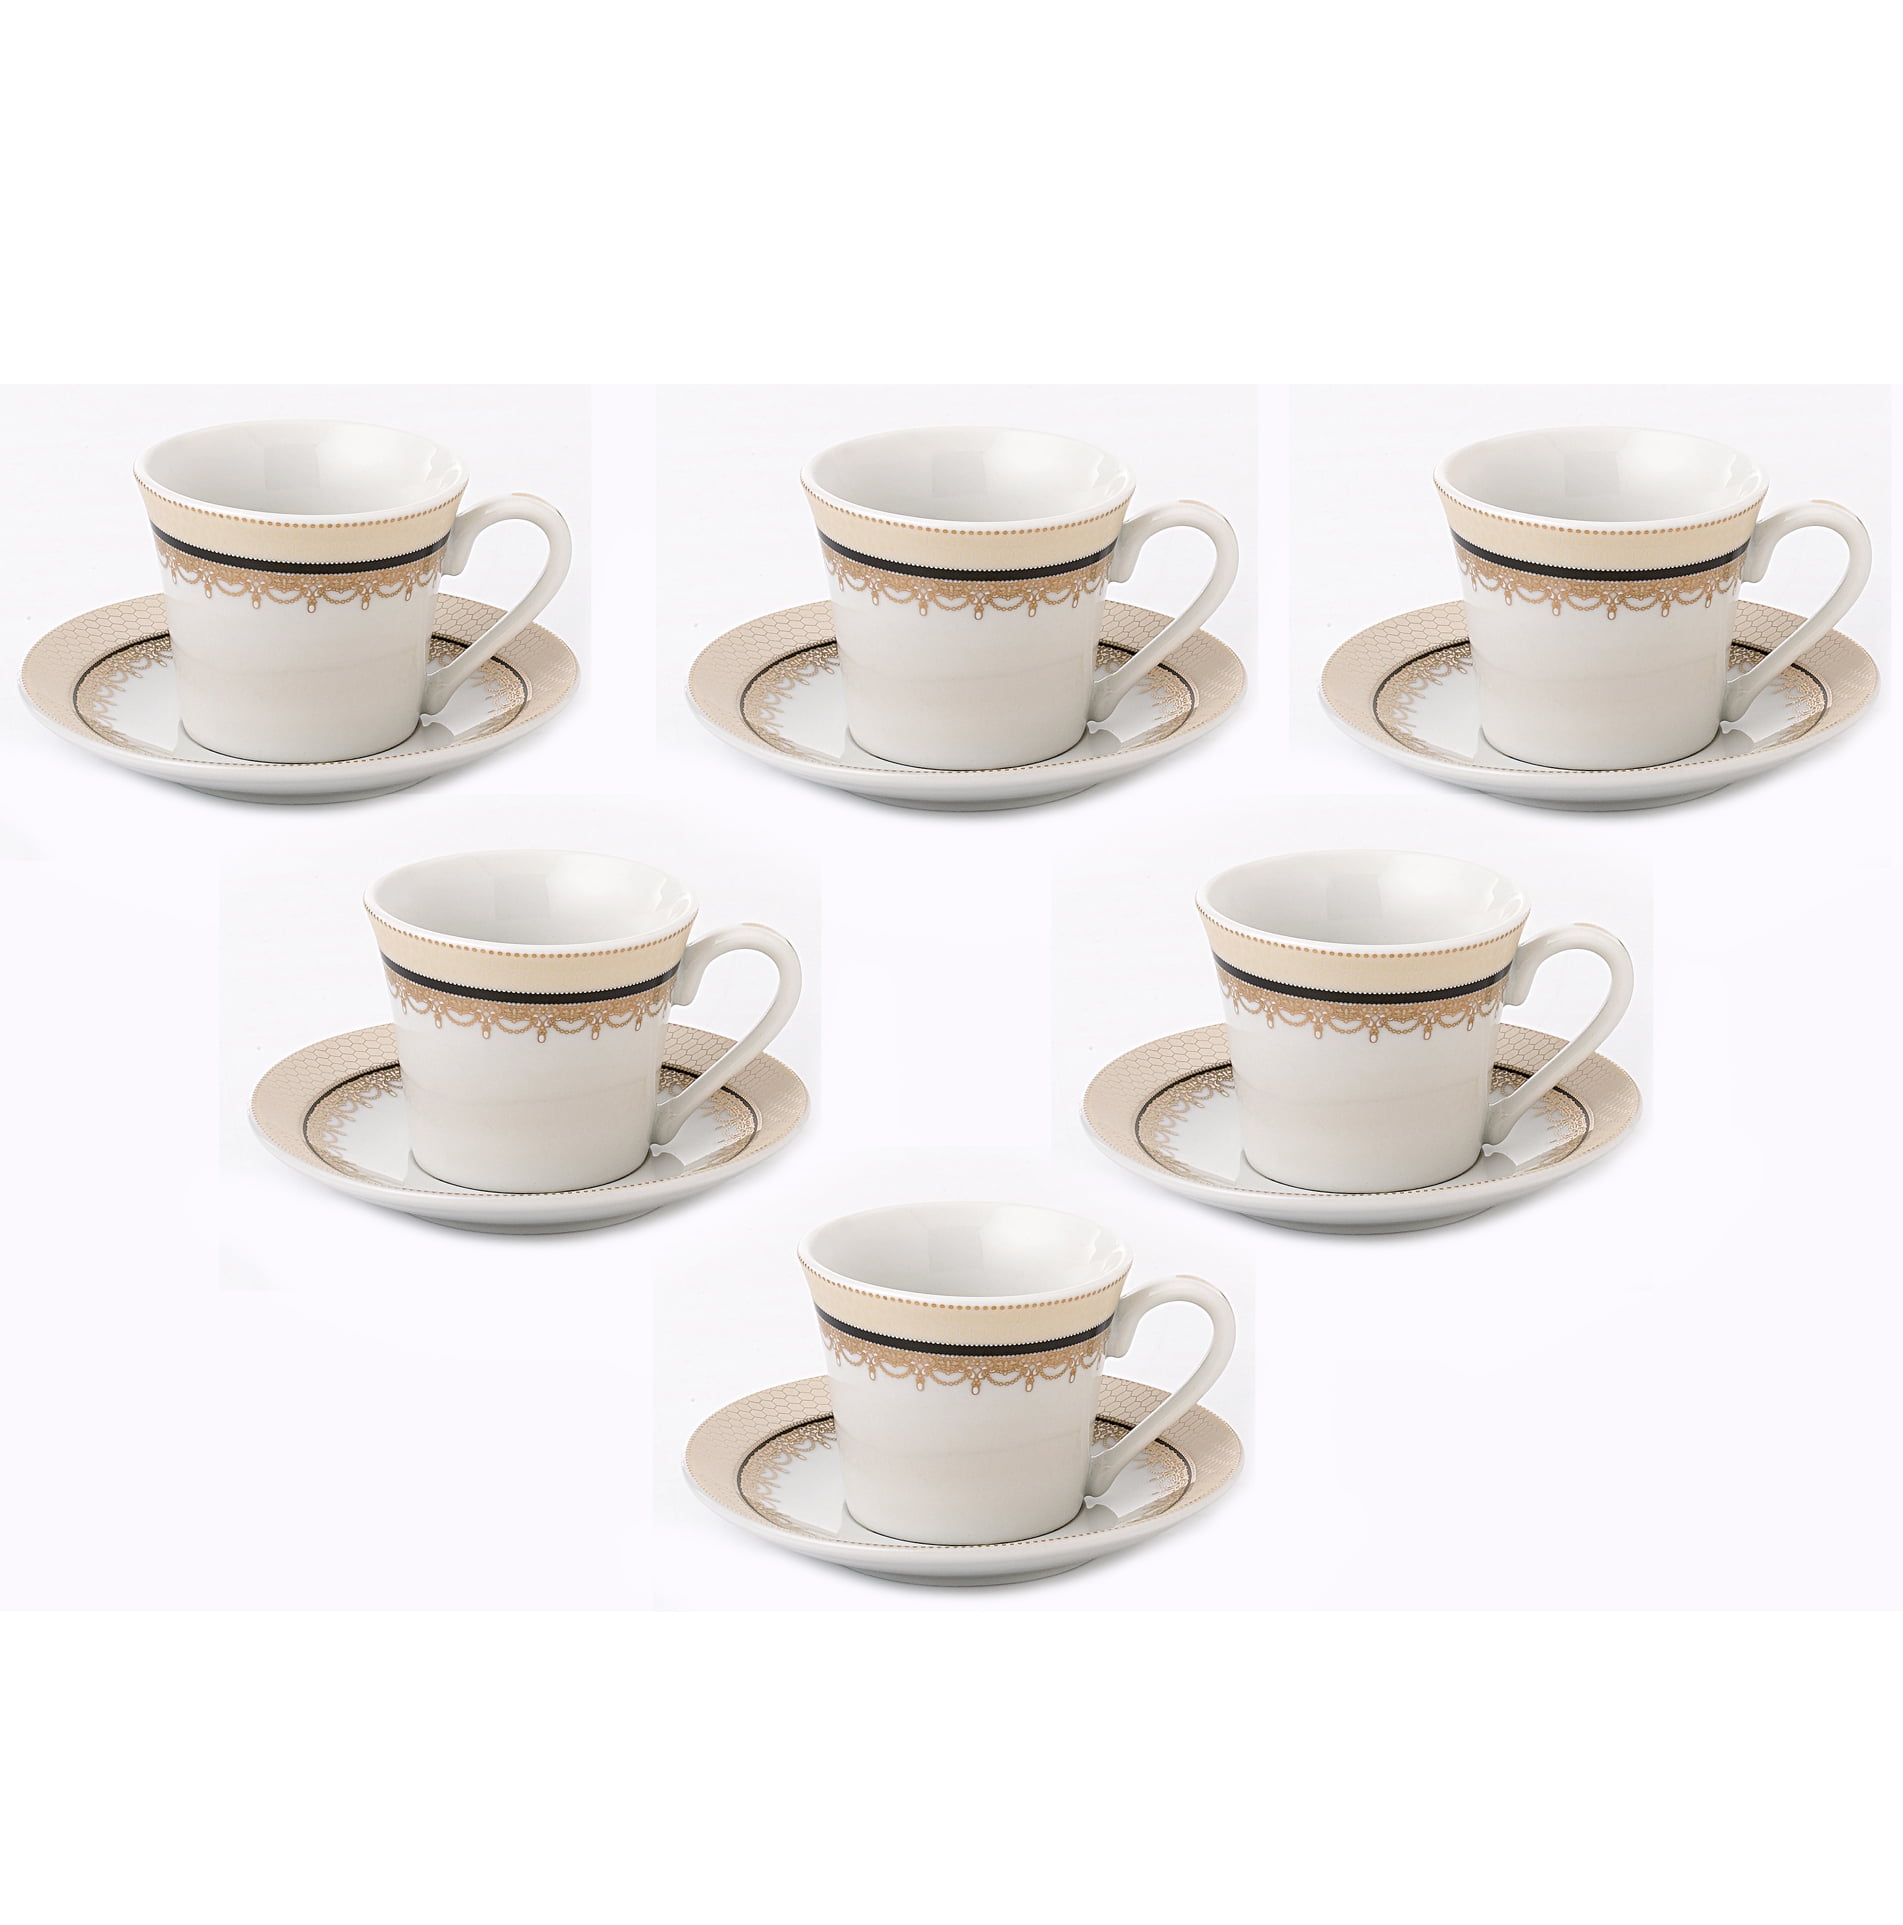 Unknown, Dining, Adorable 2 Tone Funny Faces Espresso Cups Saucers Set Of  6